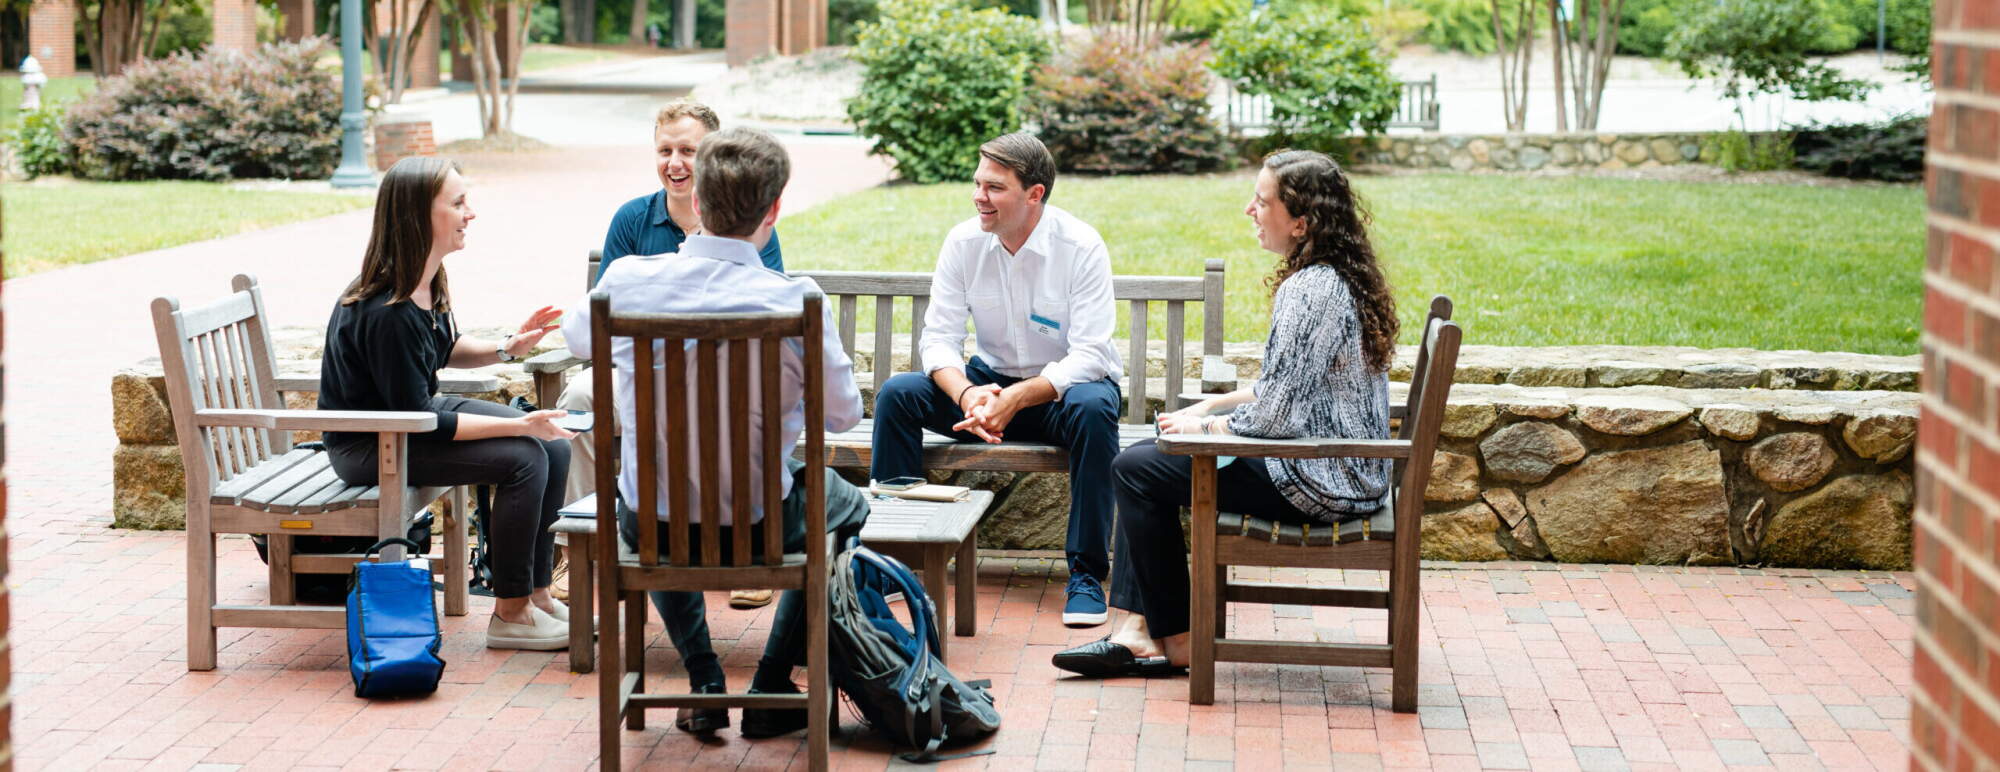 Students sit outside talking to each other. They are surrounded by green trees and lush landscape. The students are sitting on wooden outdoor furniture.